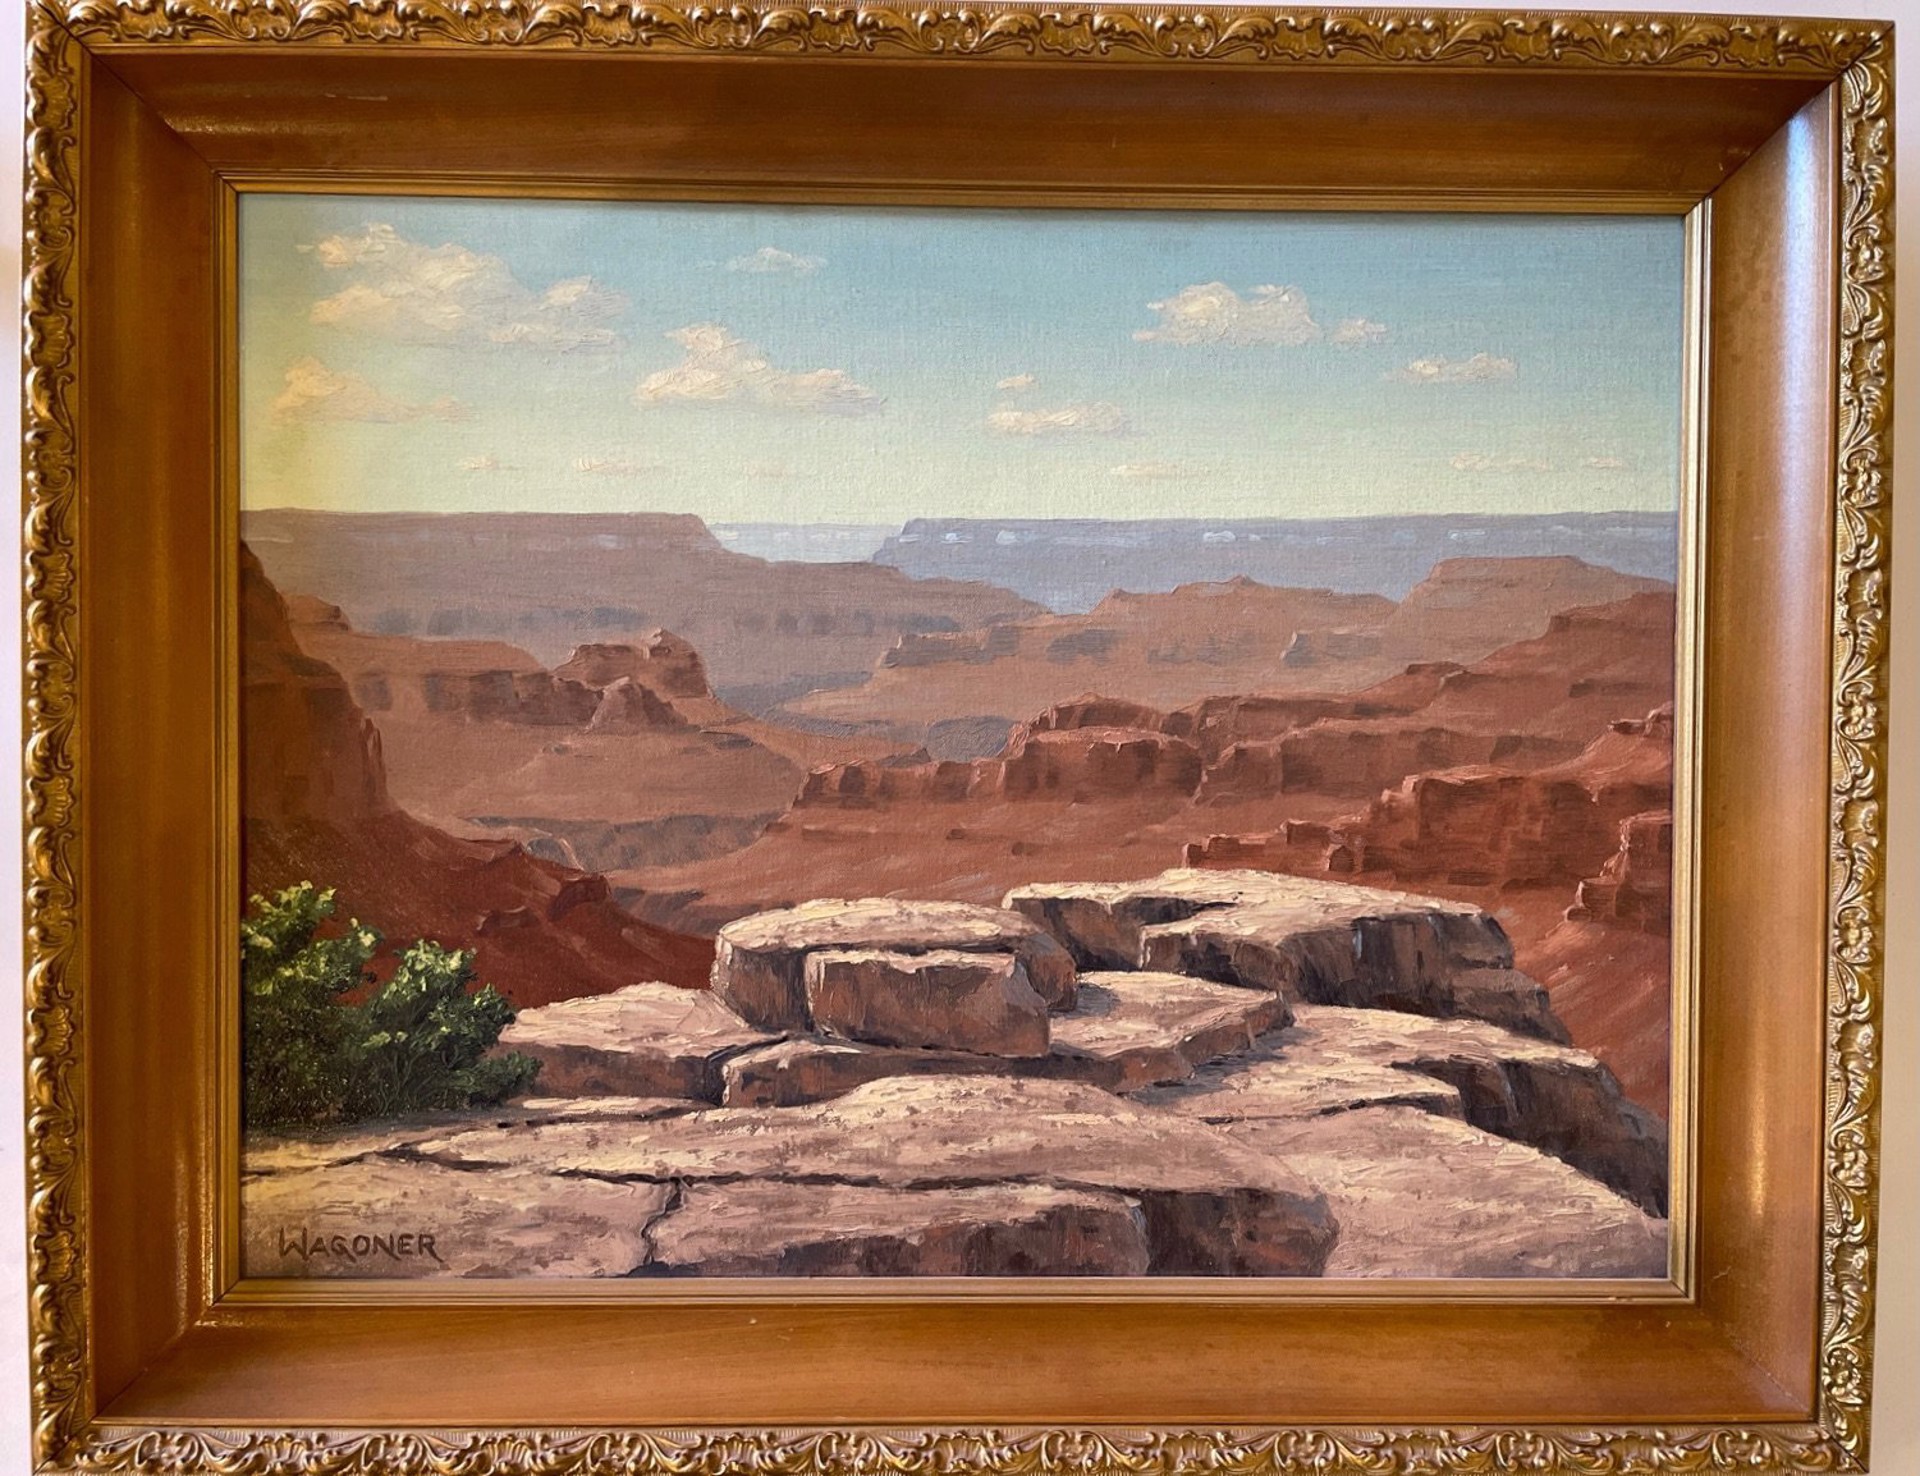 Grand Canyon by William H. Wagoner